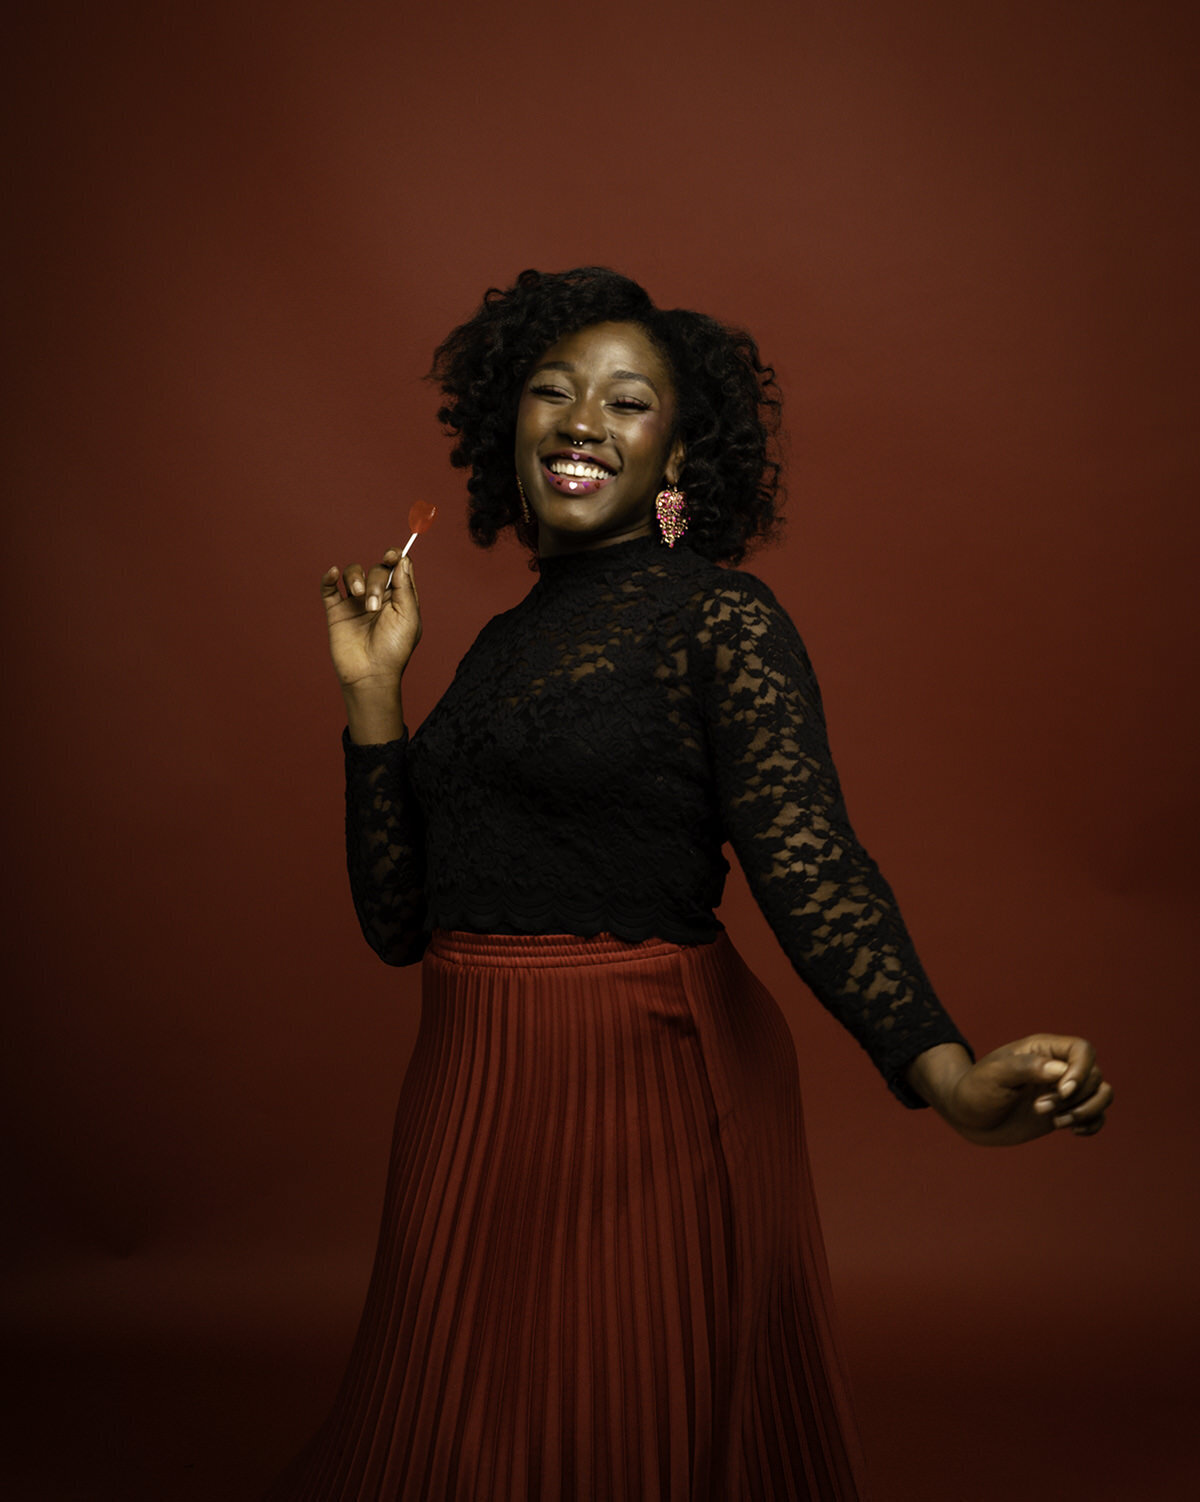 Black woman in lace black shirt and red skirt smiling